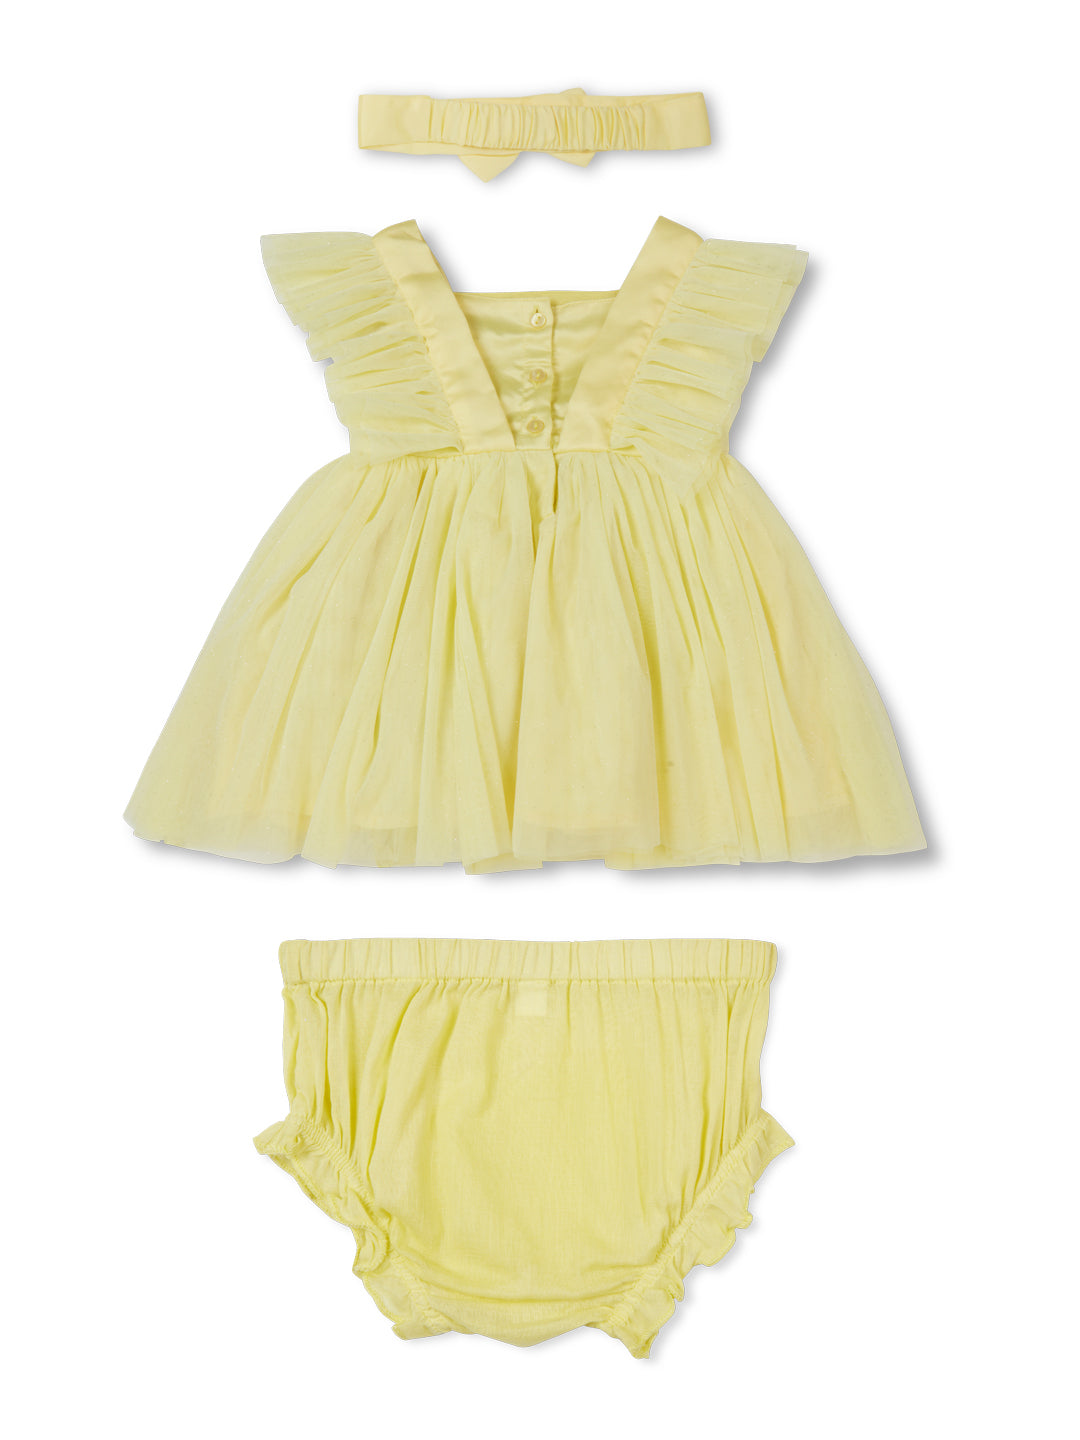 Baby Girls yellow party wear dress with lining.Co-ordinated undies and hairband.